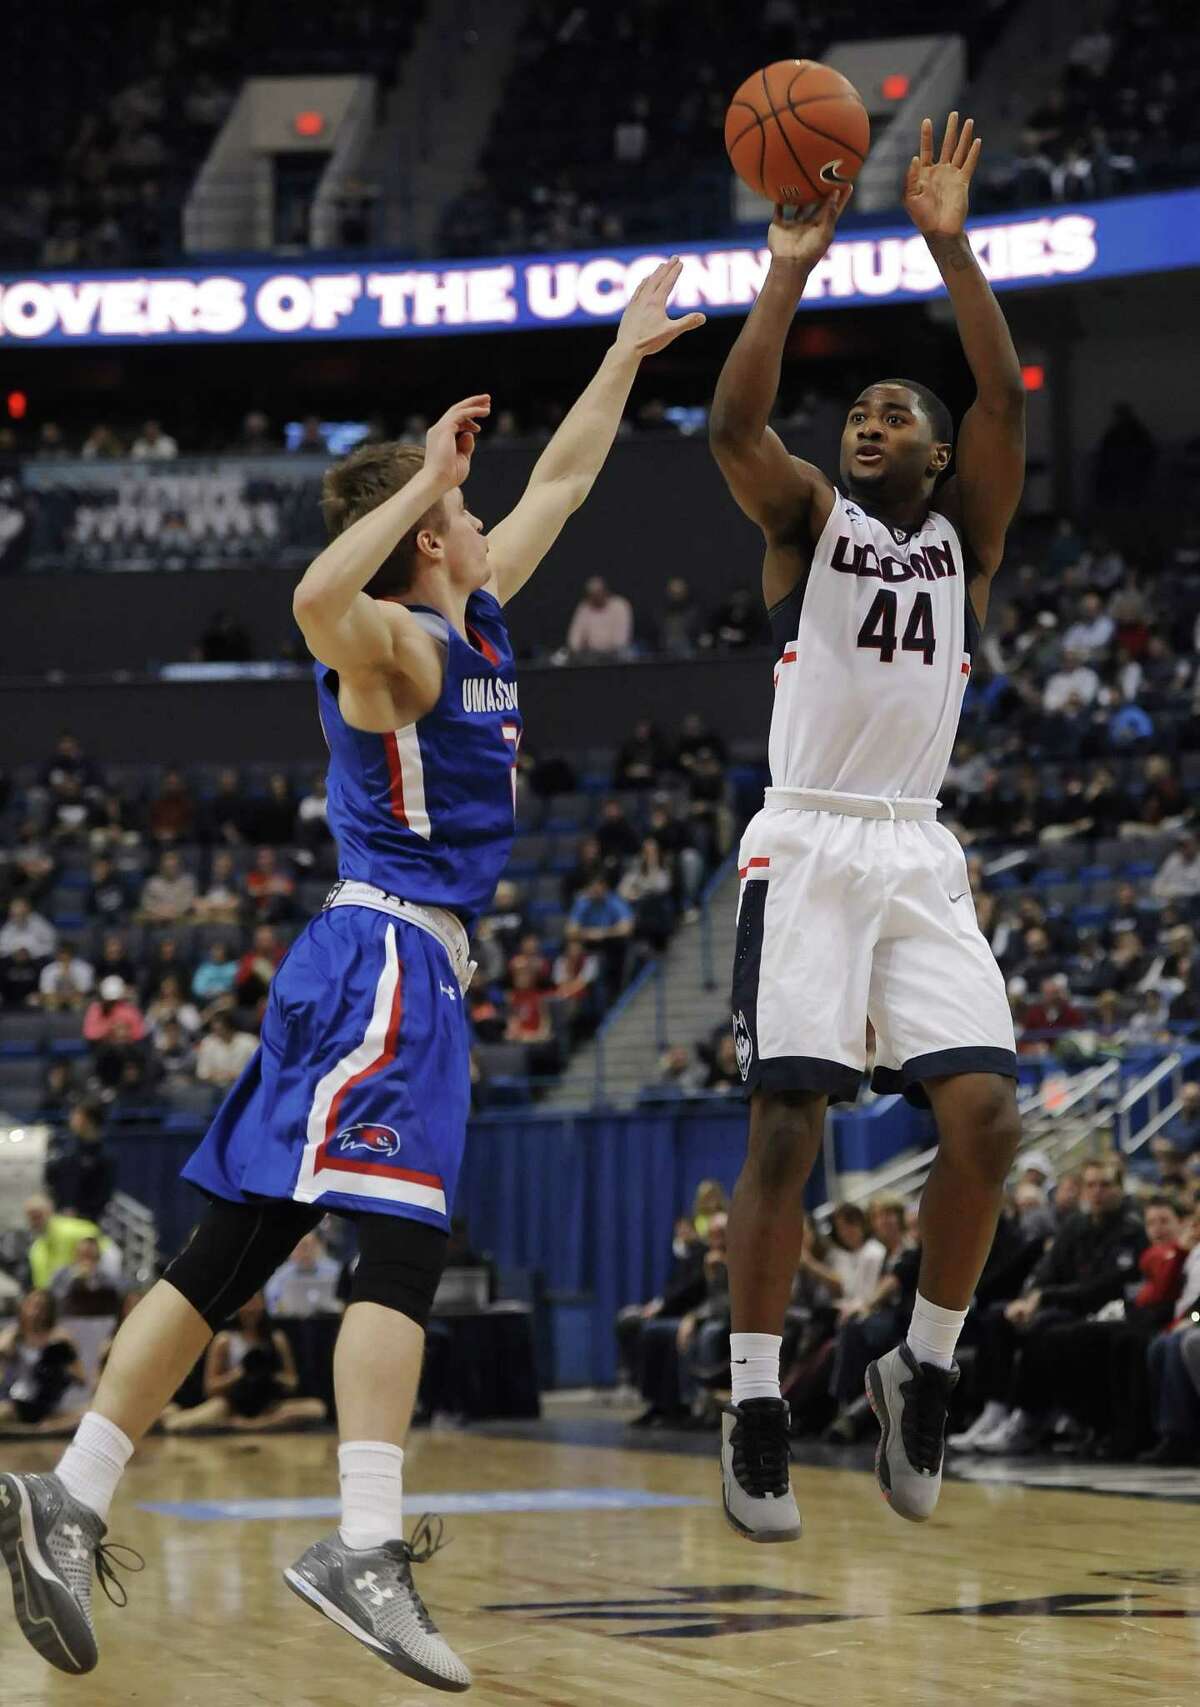 UConn’s Rodney Purvis, right, shoots over UMass-Lowell’s DJ Mlachnik, left, in the second half of Sunday’s game in Hartford.